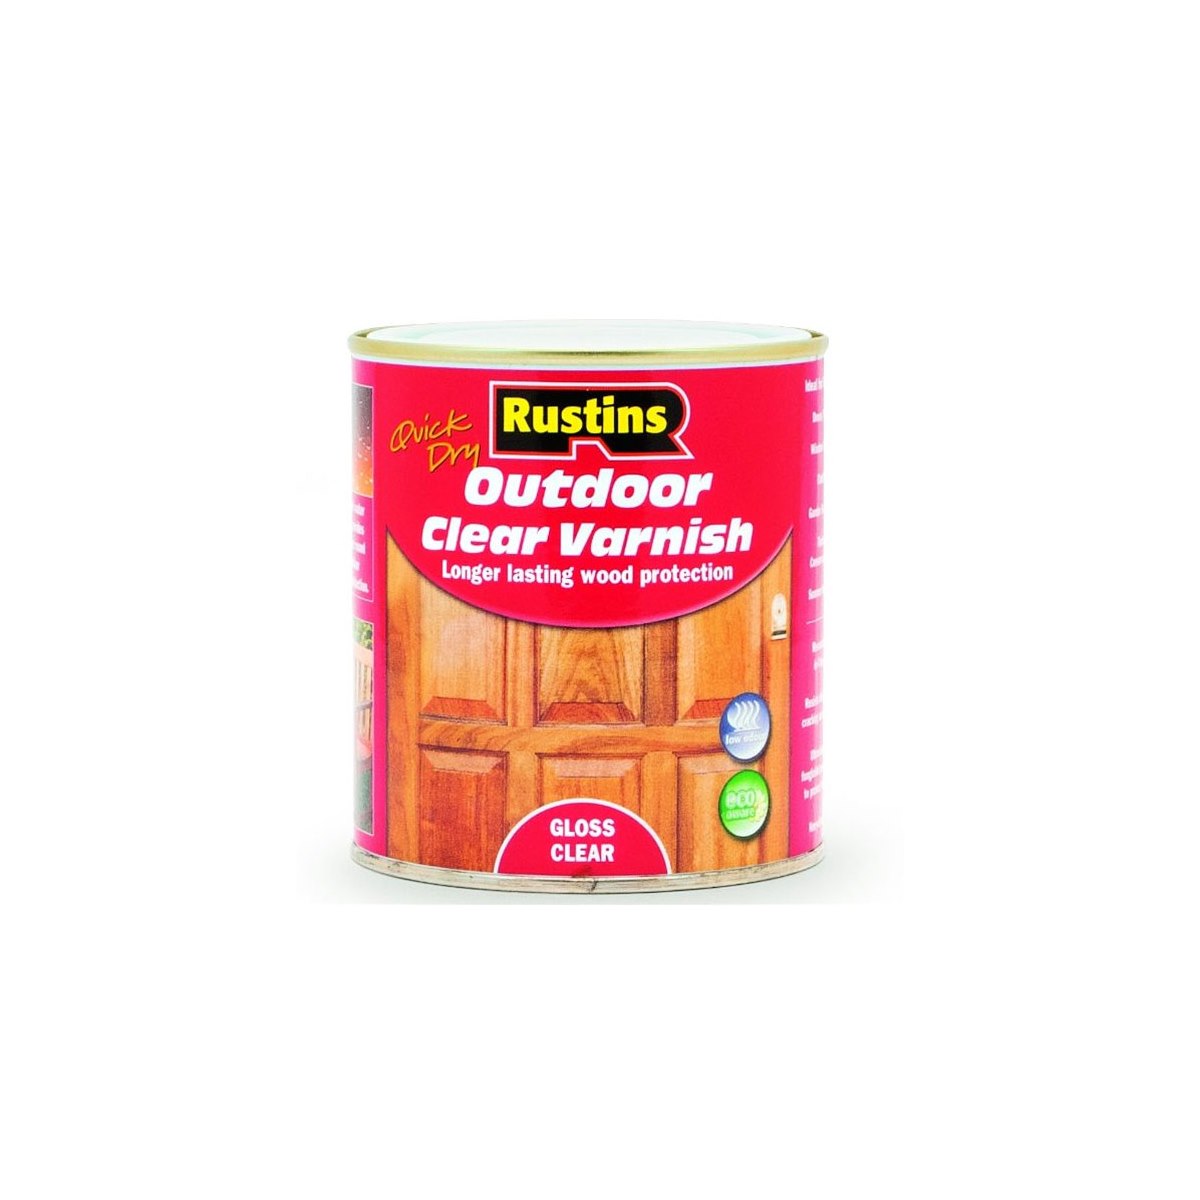 Rustins Quick Dry Outdoor Clear Varnish Gloss 1 Litre